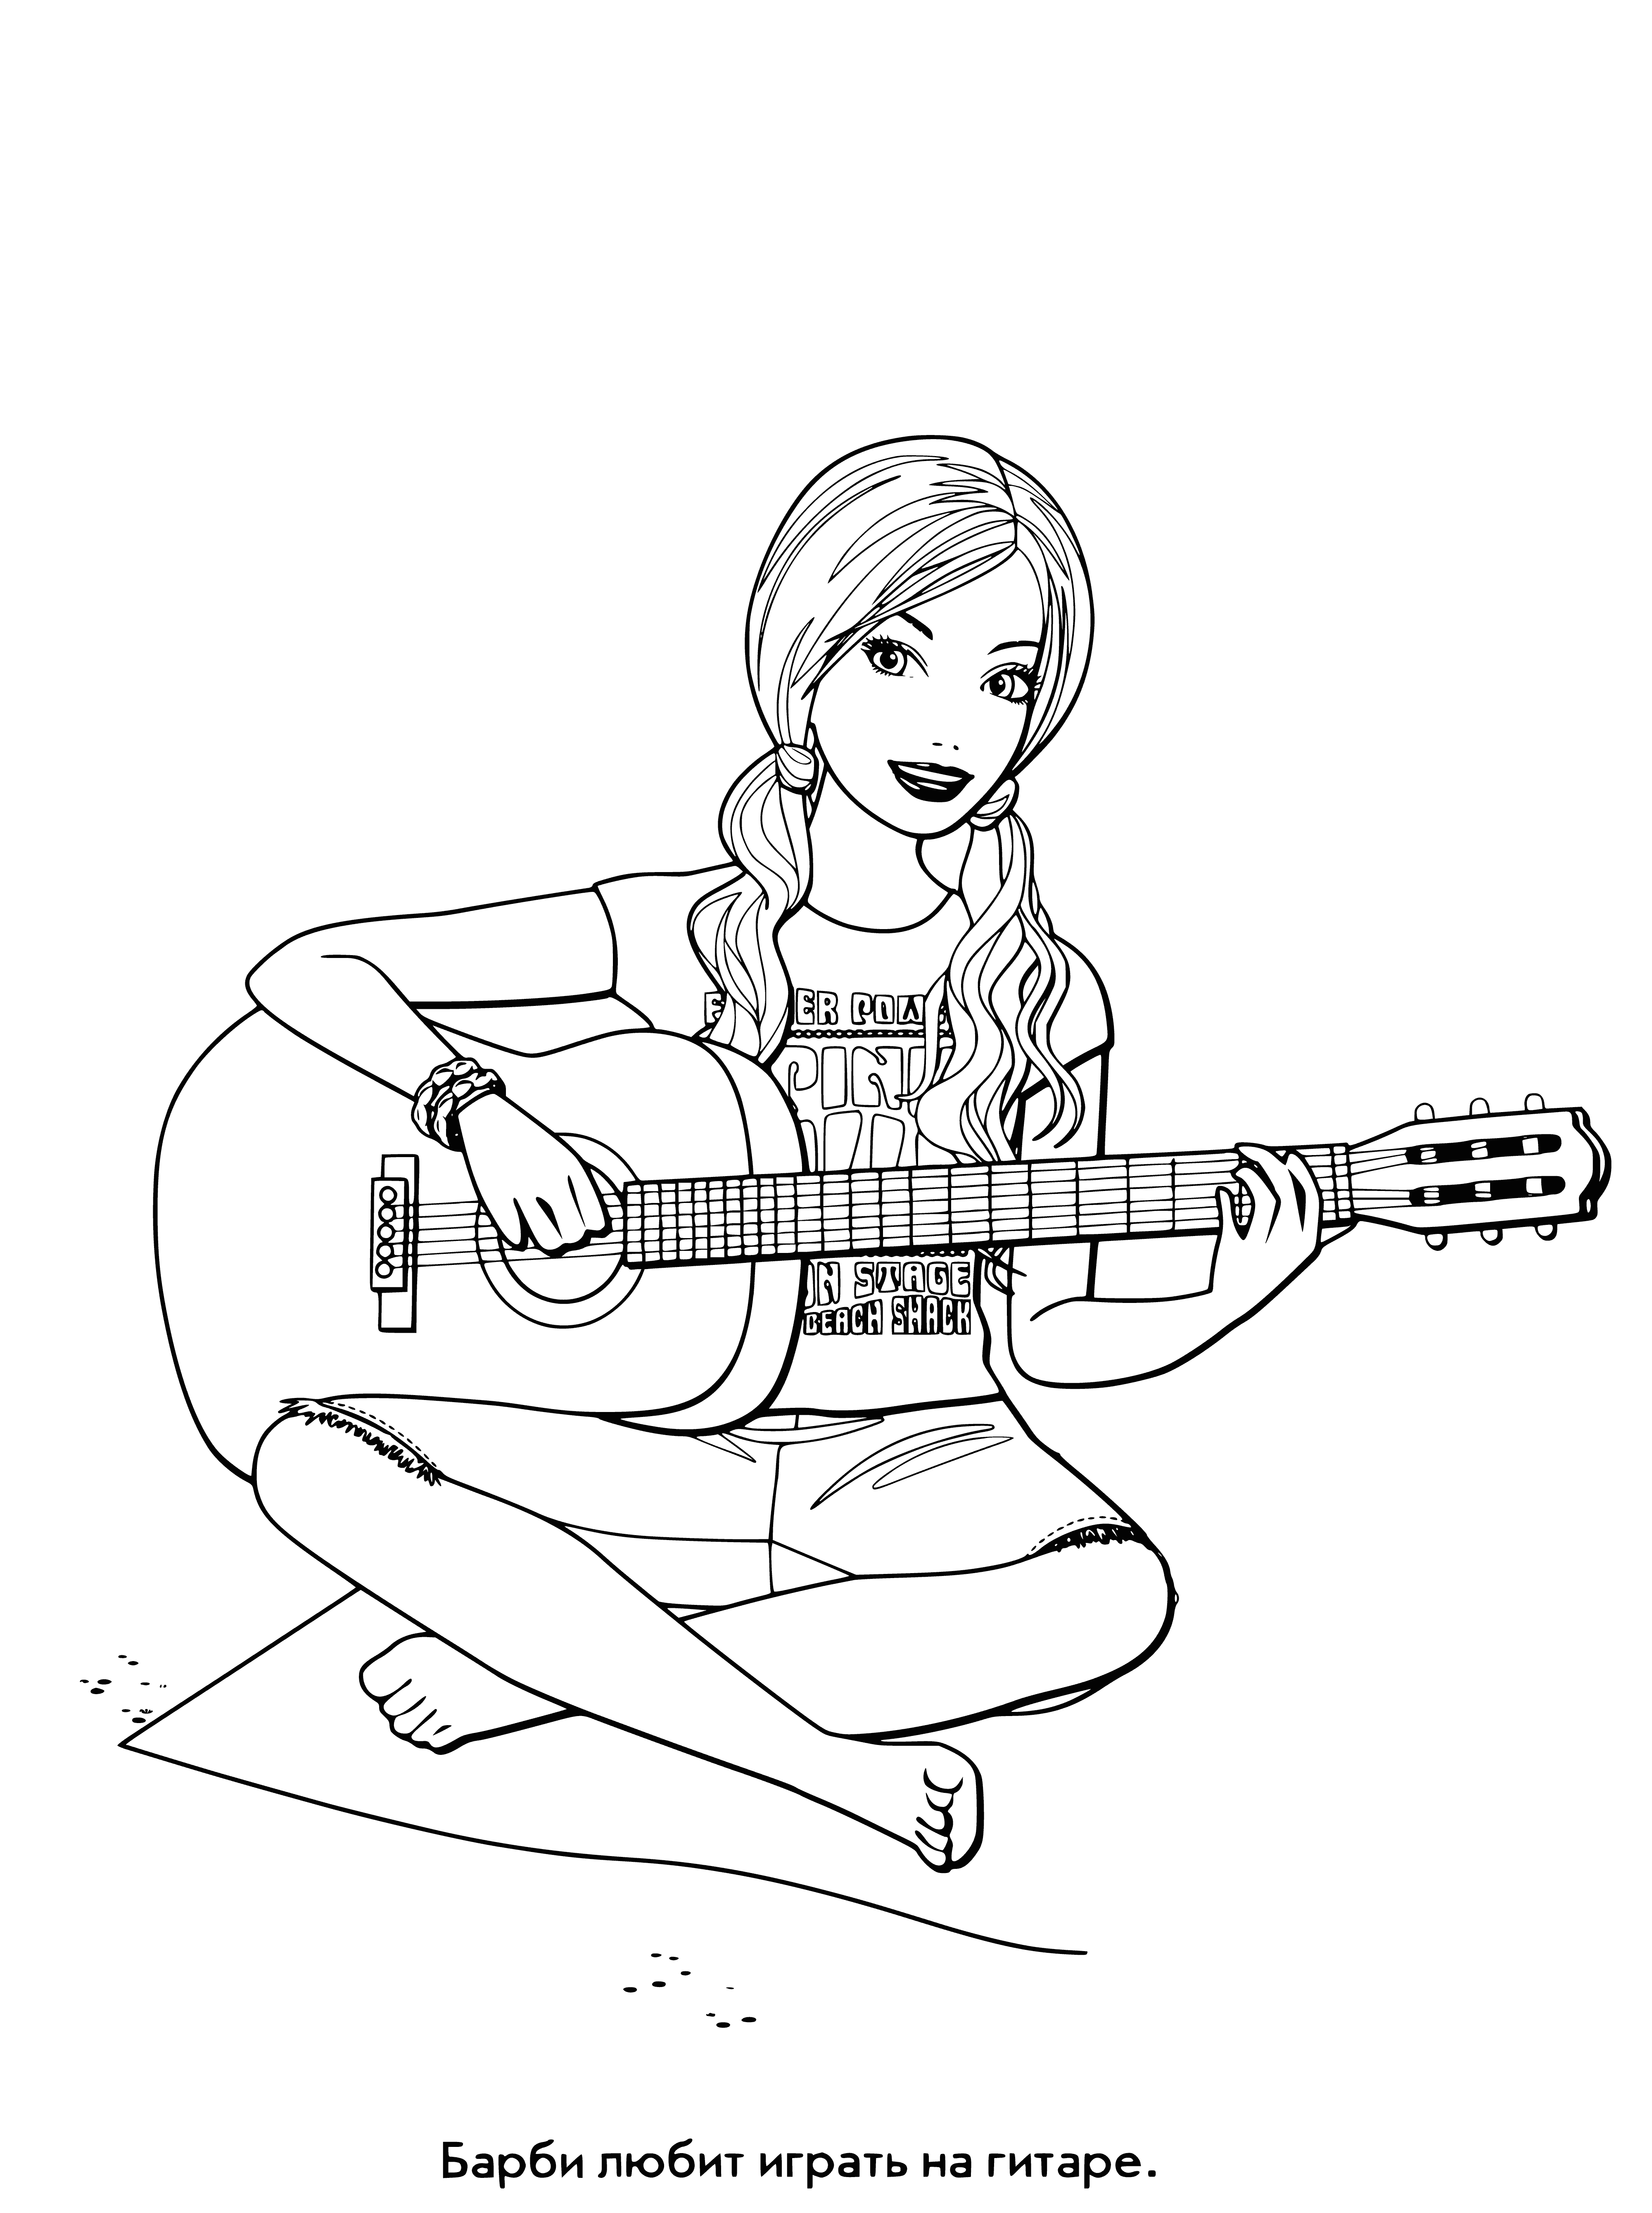 Barbie with a guitar coloring page